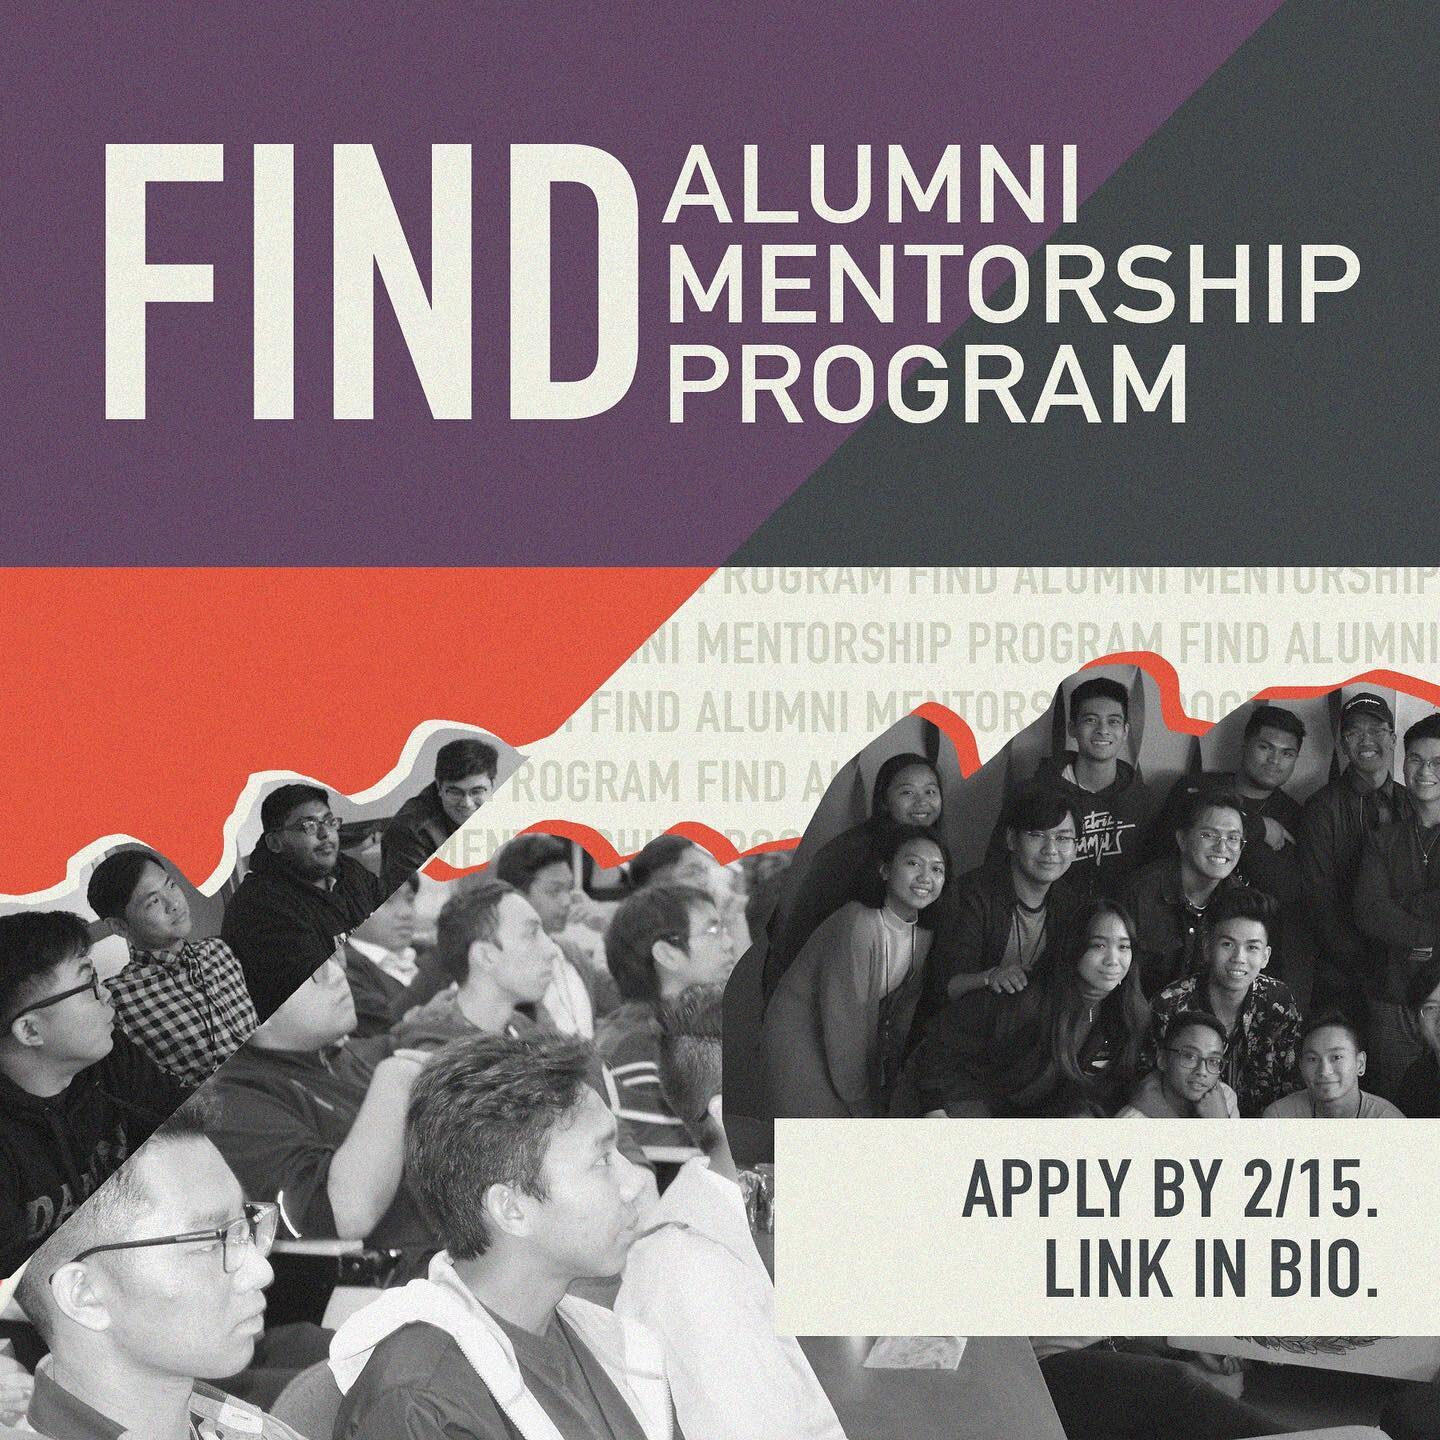 For those of you who enjoyed our Alumni Panel, here&rsquo;s your chance to connect with other alumni in your field! Alumni are welcomed and encouraged to sign up as mentors!! Undergraduates will sign up as mentees. Please fill out the form in our lin